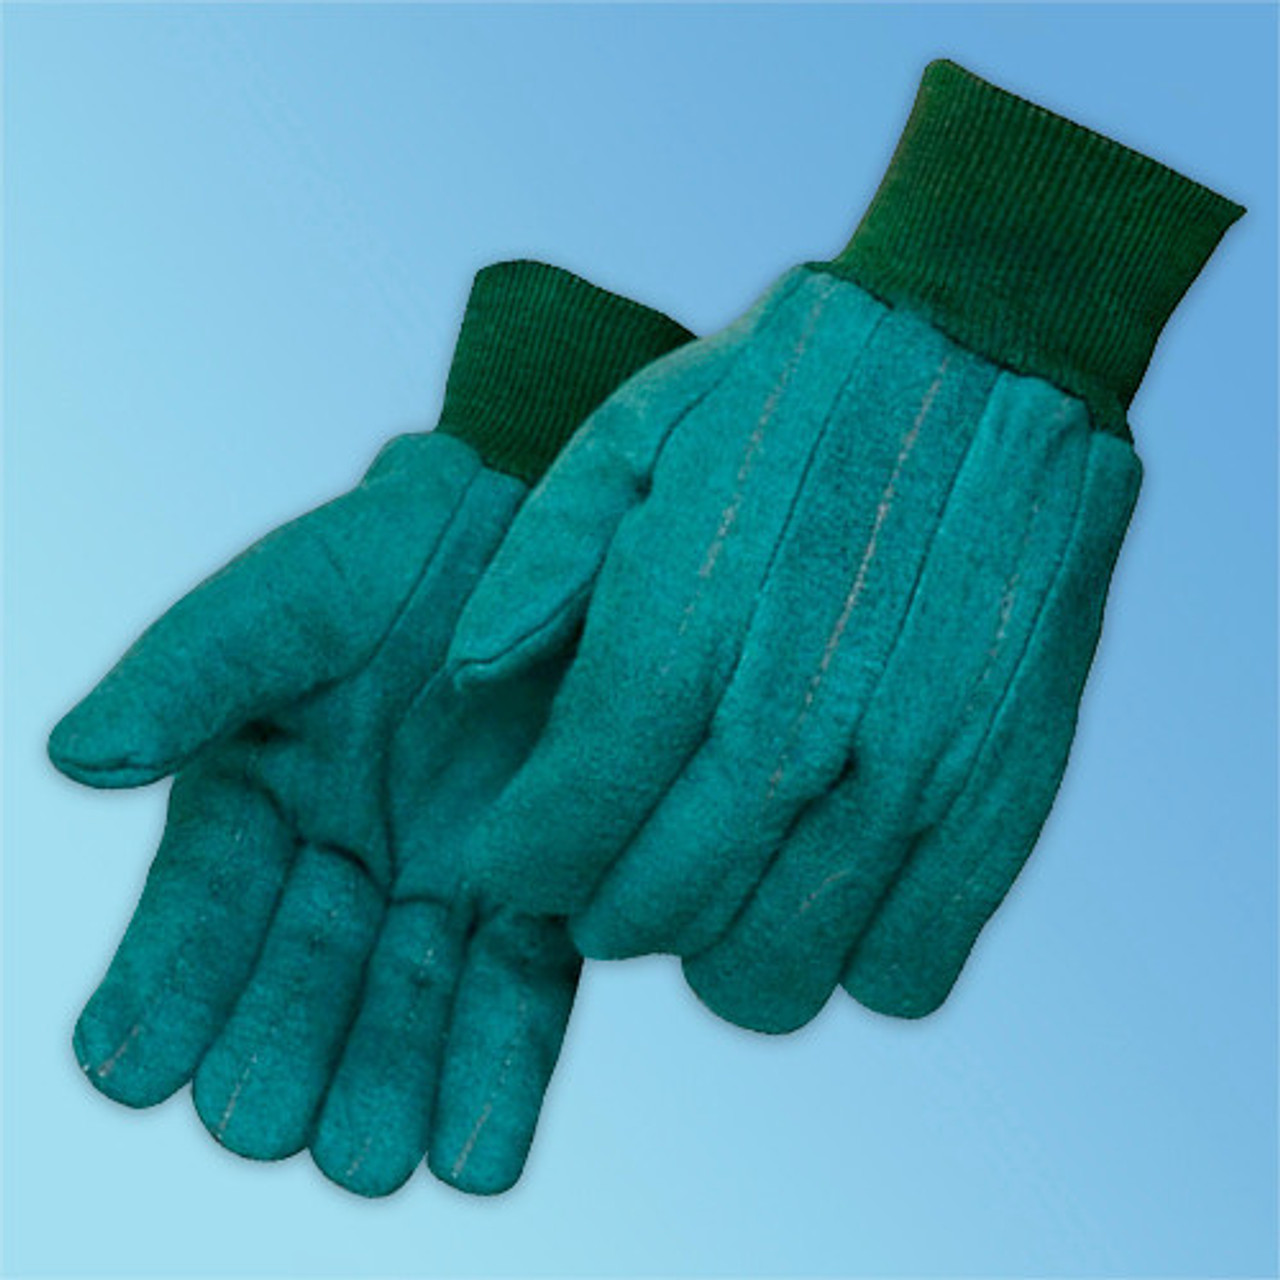 Green Chore Glove, 2 Layer Quilted Palm/Back, Heavyweight, LG, 12/pair